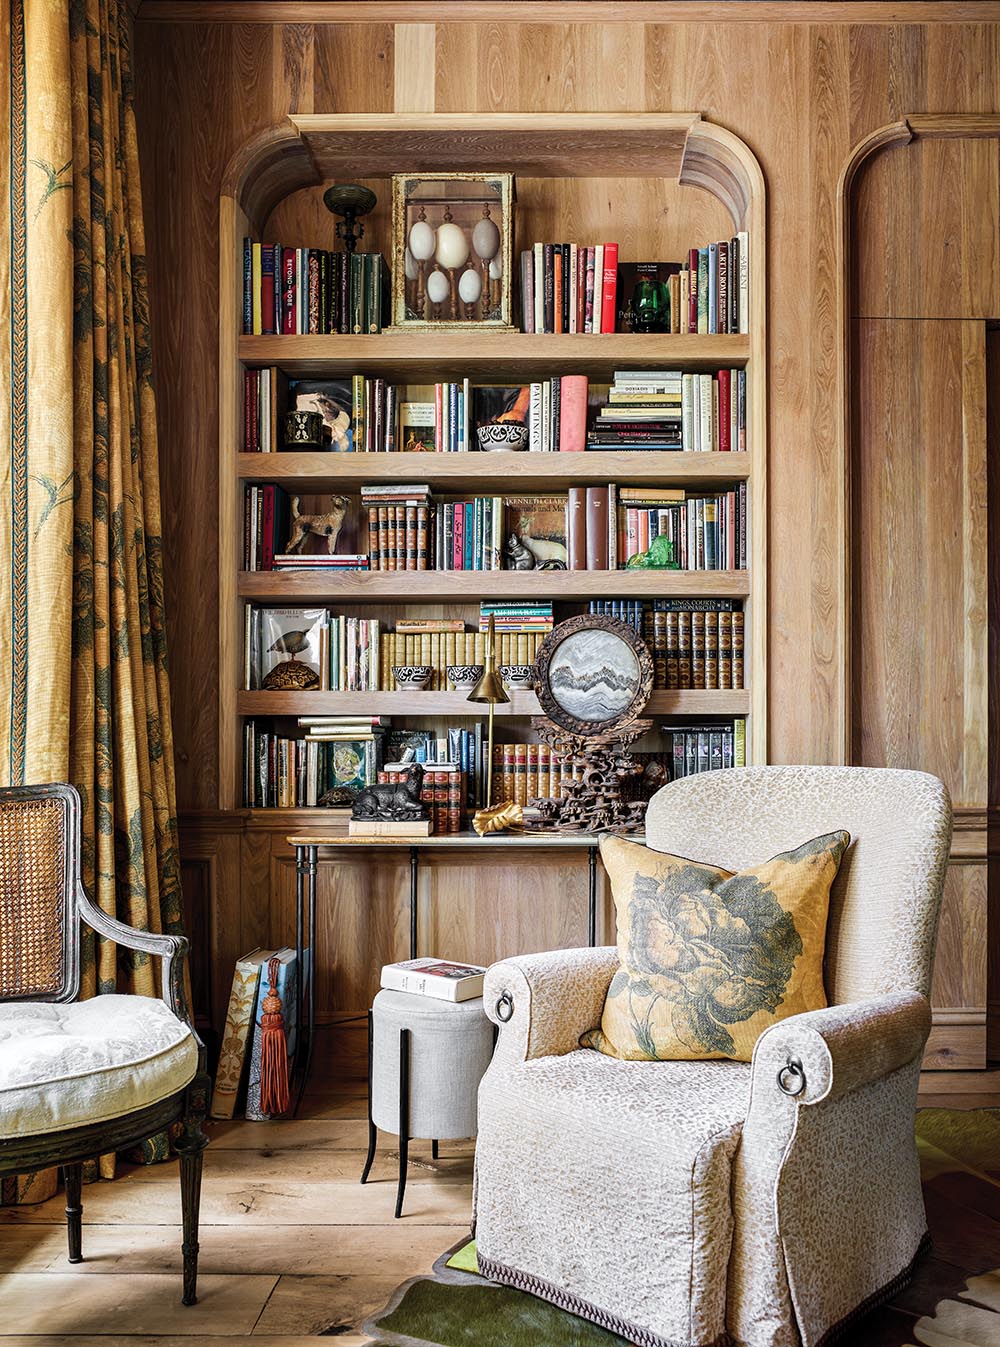 Pair of chairs in front of oak paneled wall with built in bookcases in library of the Flower Atlanta Showhouse.